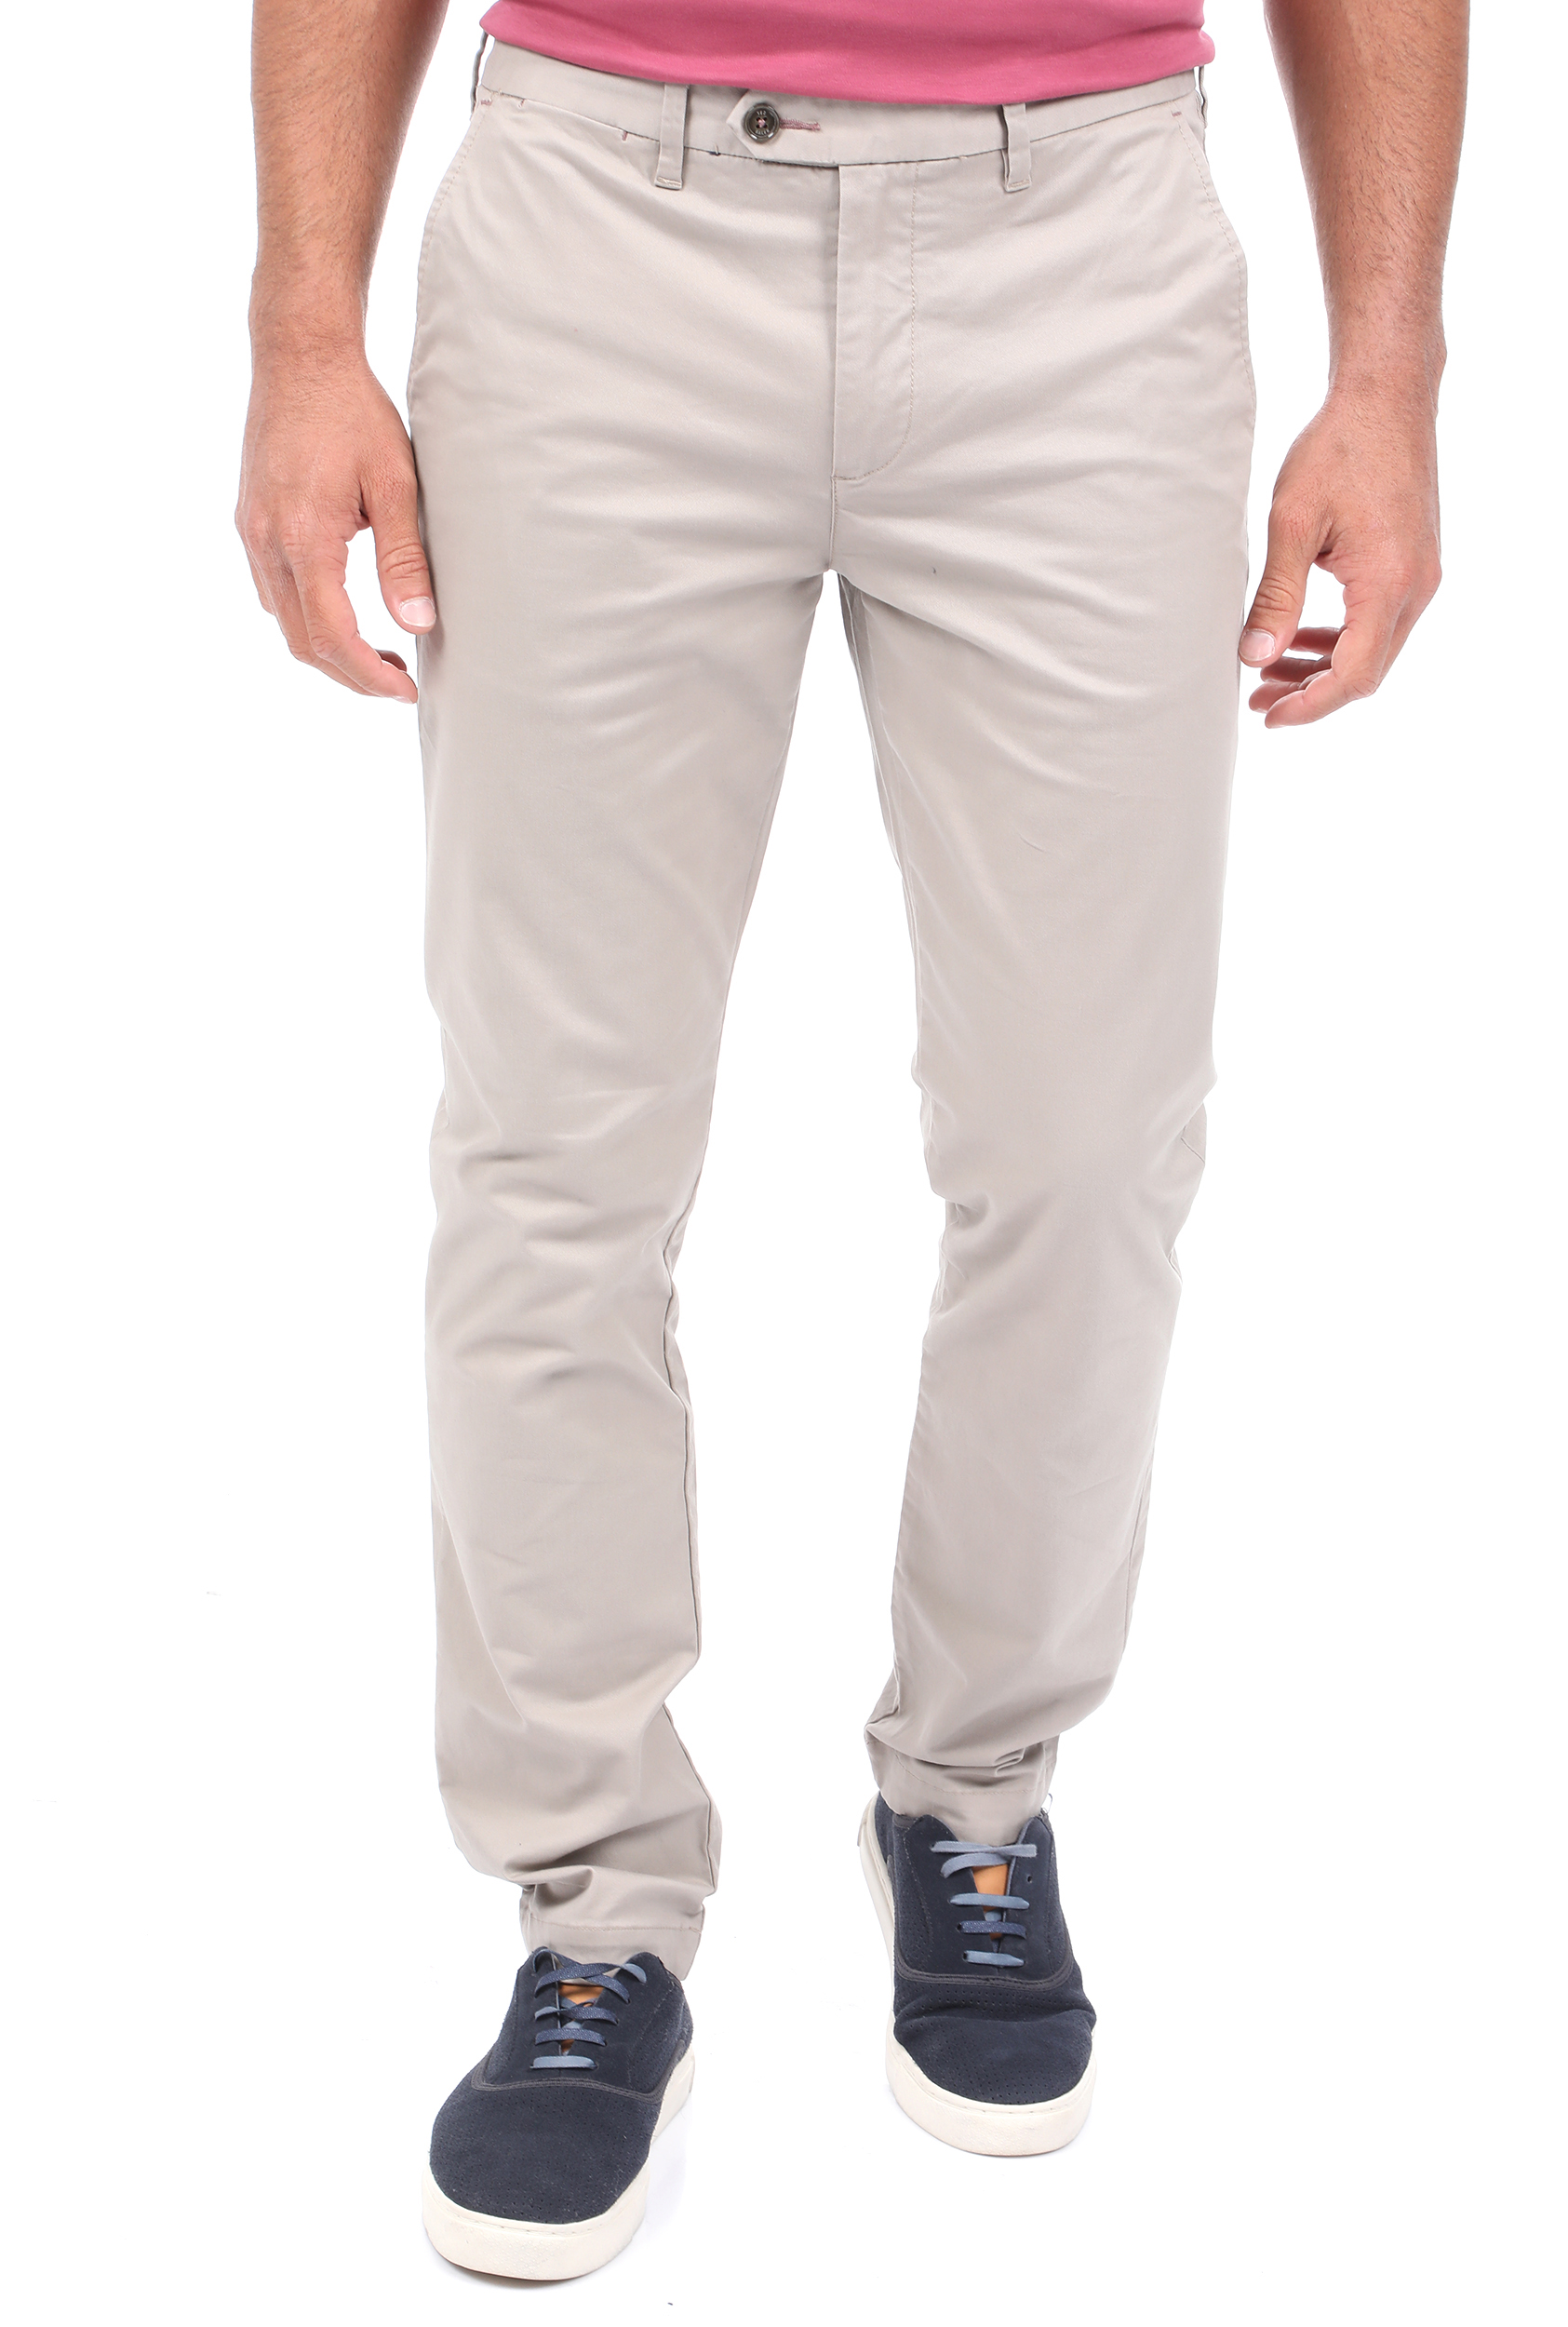 TED BAKER Ανδρικό chino παντελόνι TED BAKER SINCERE SLIM FIT CORE PLAIN γκρι